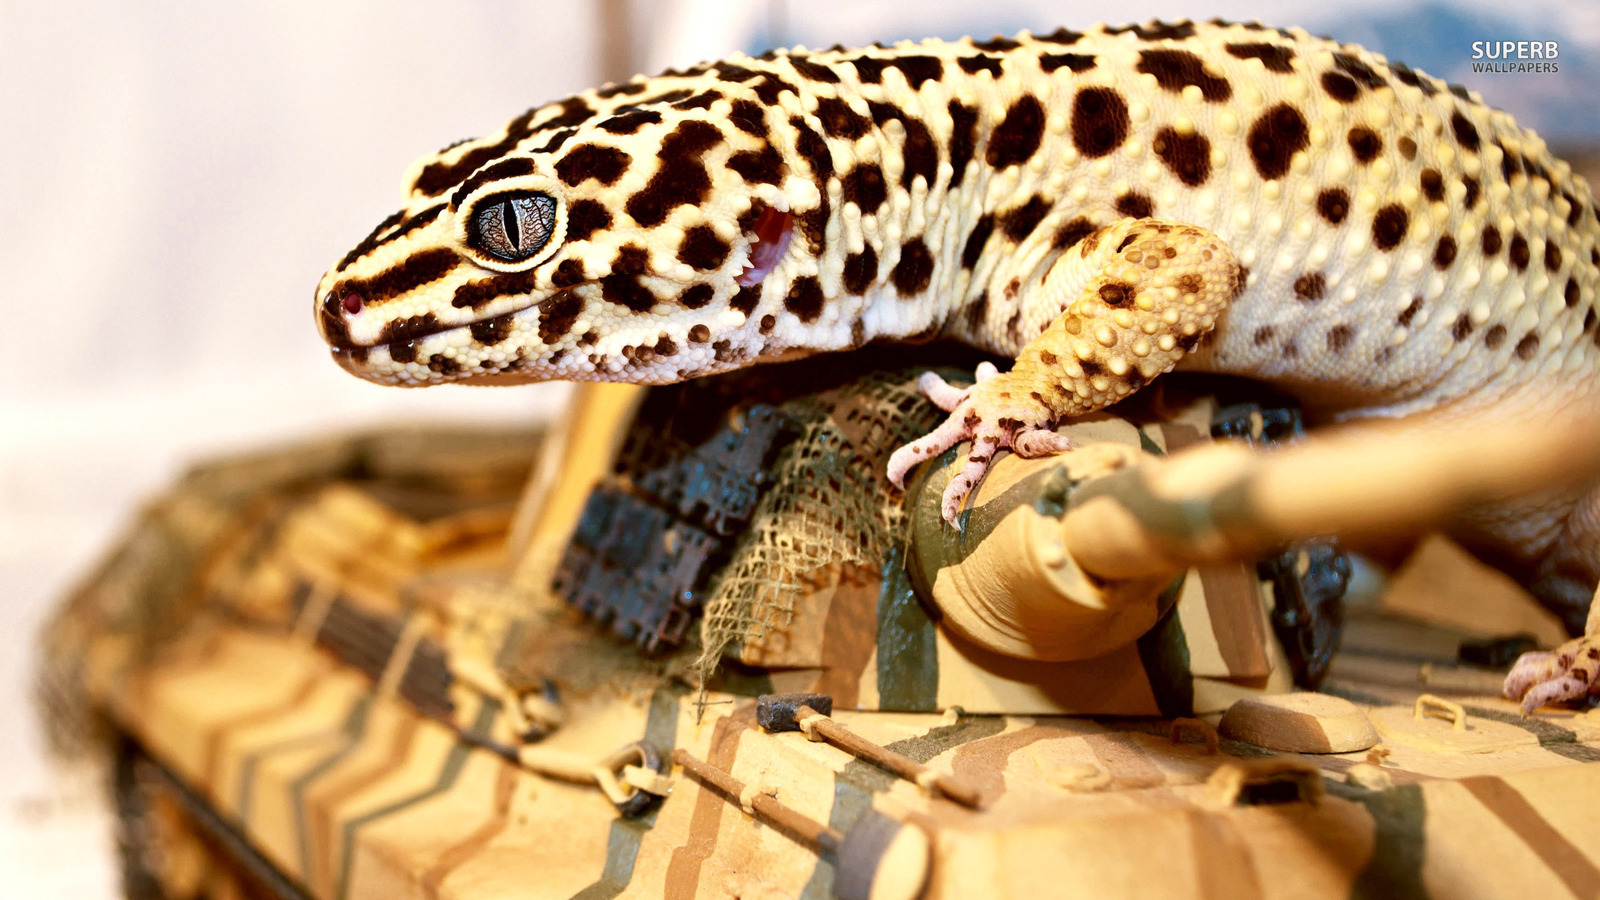 Lizards Image Spotted Lizard HD Wallpaper And Background